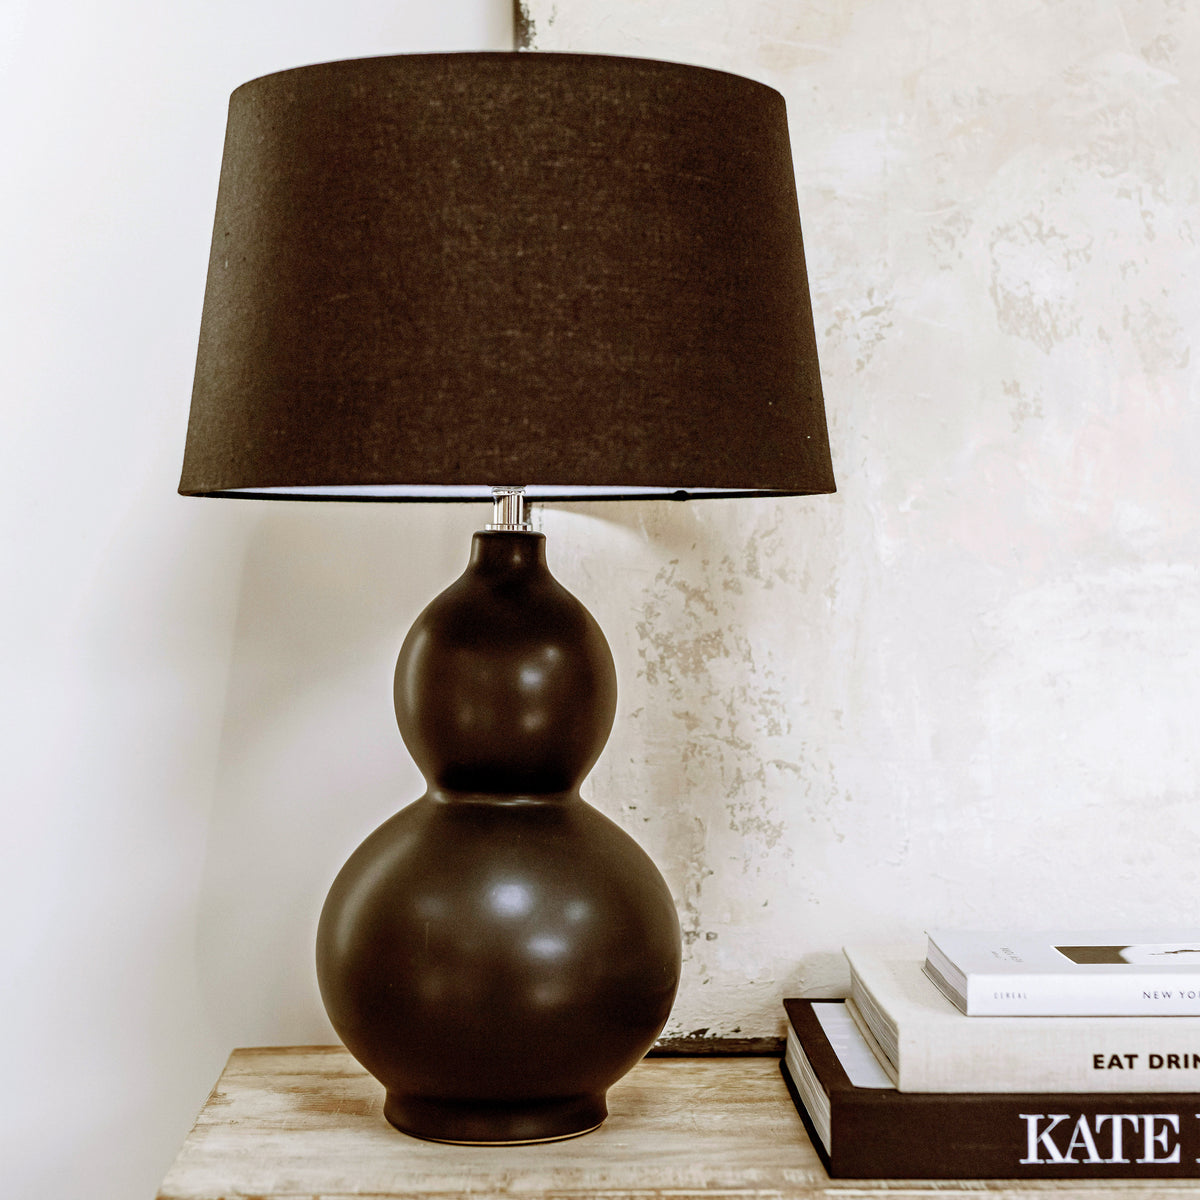 Black Ceramic Table Lamp on console table